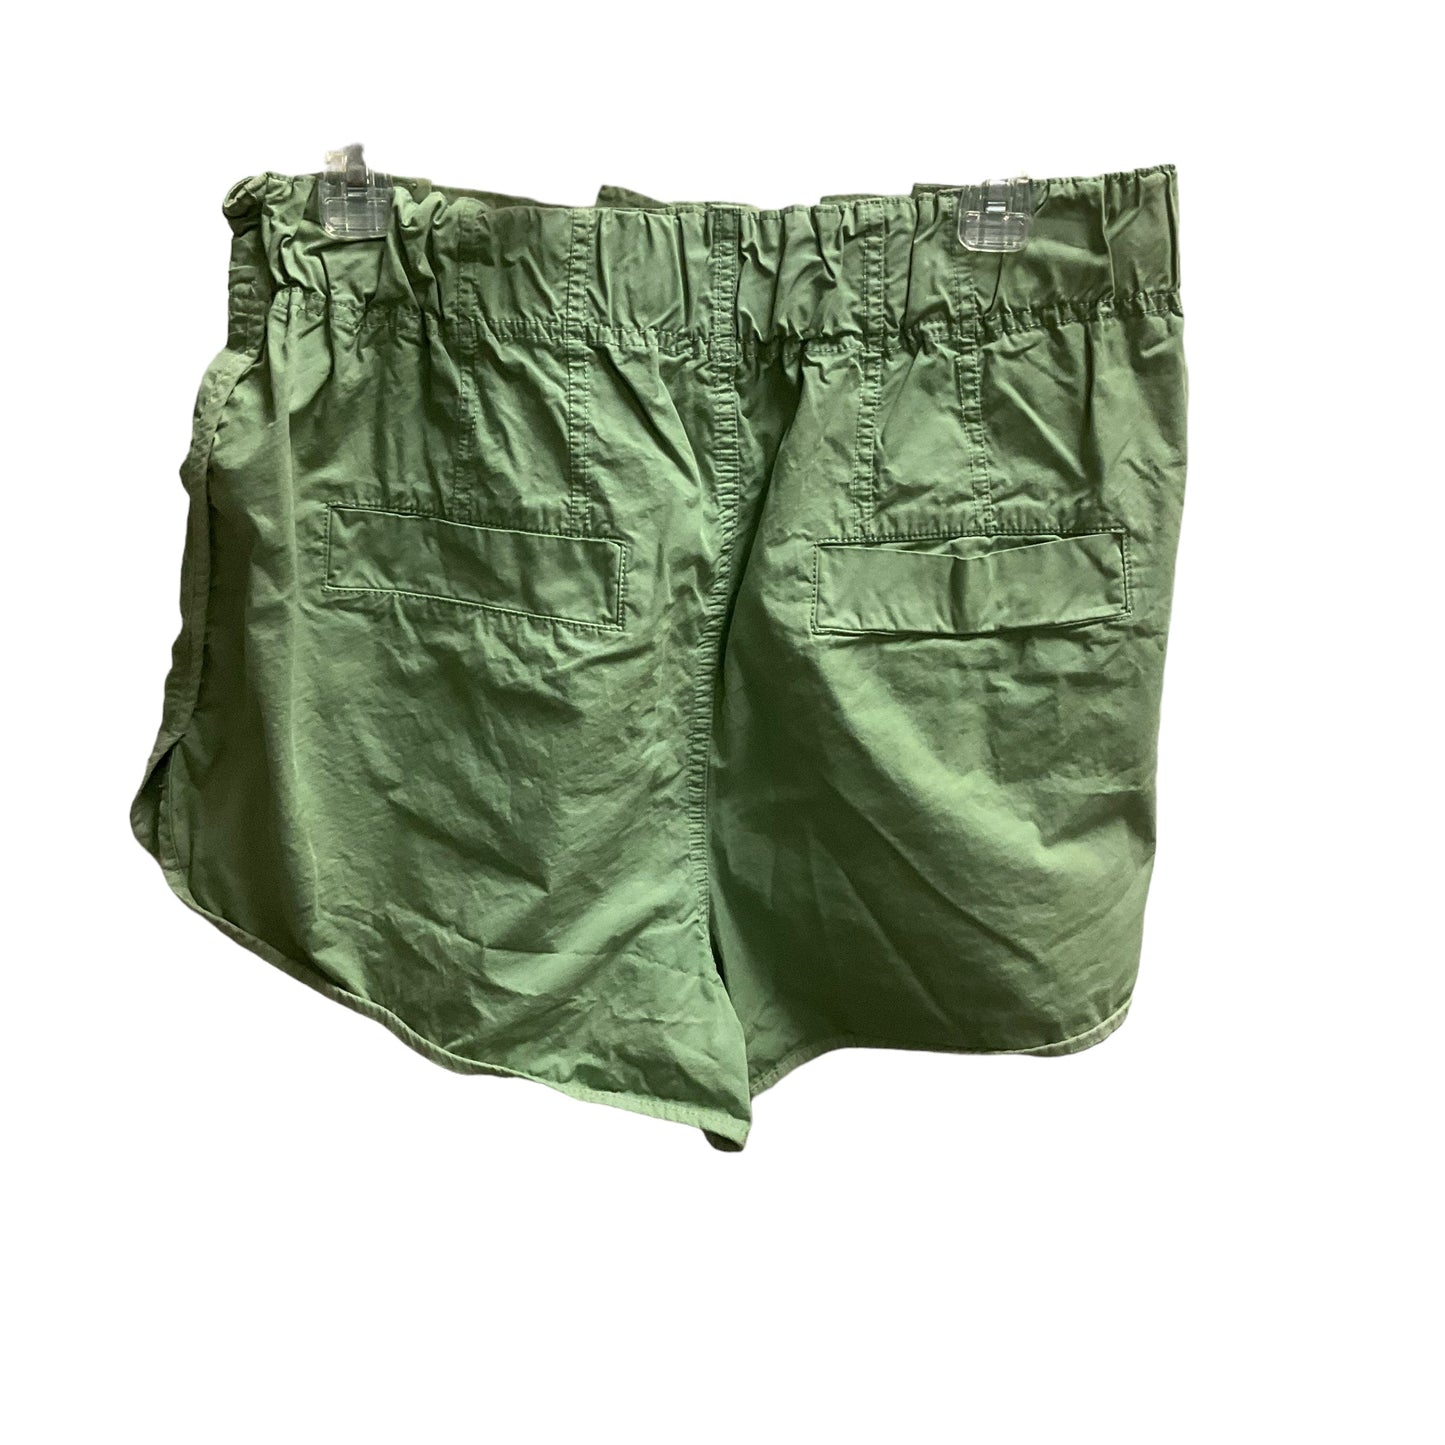 Green Shorts Free People, Size L